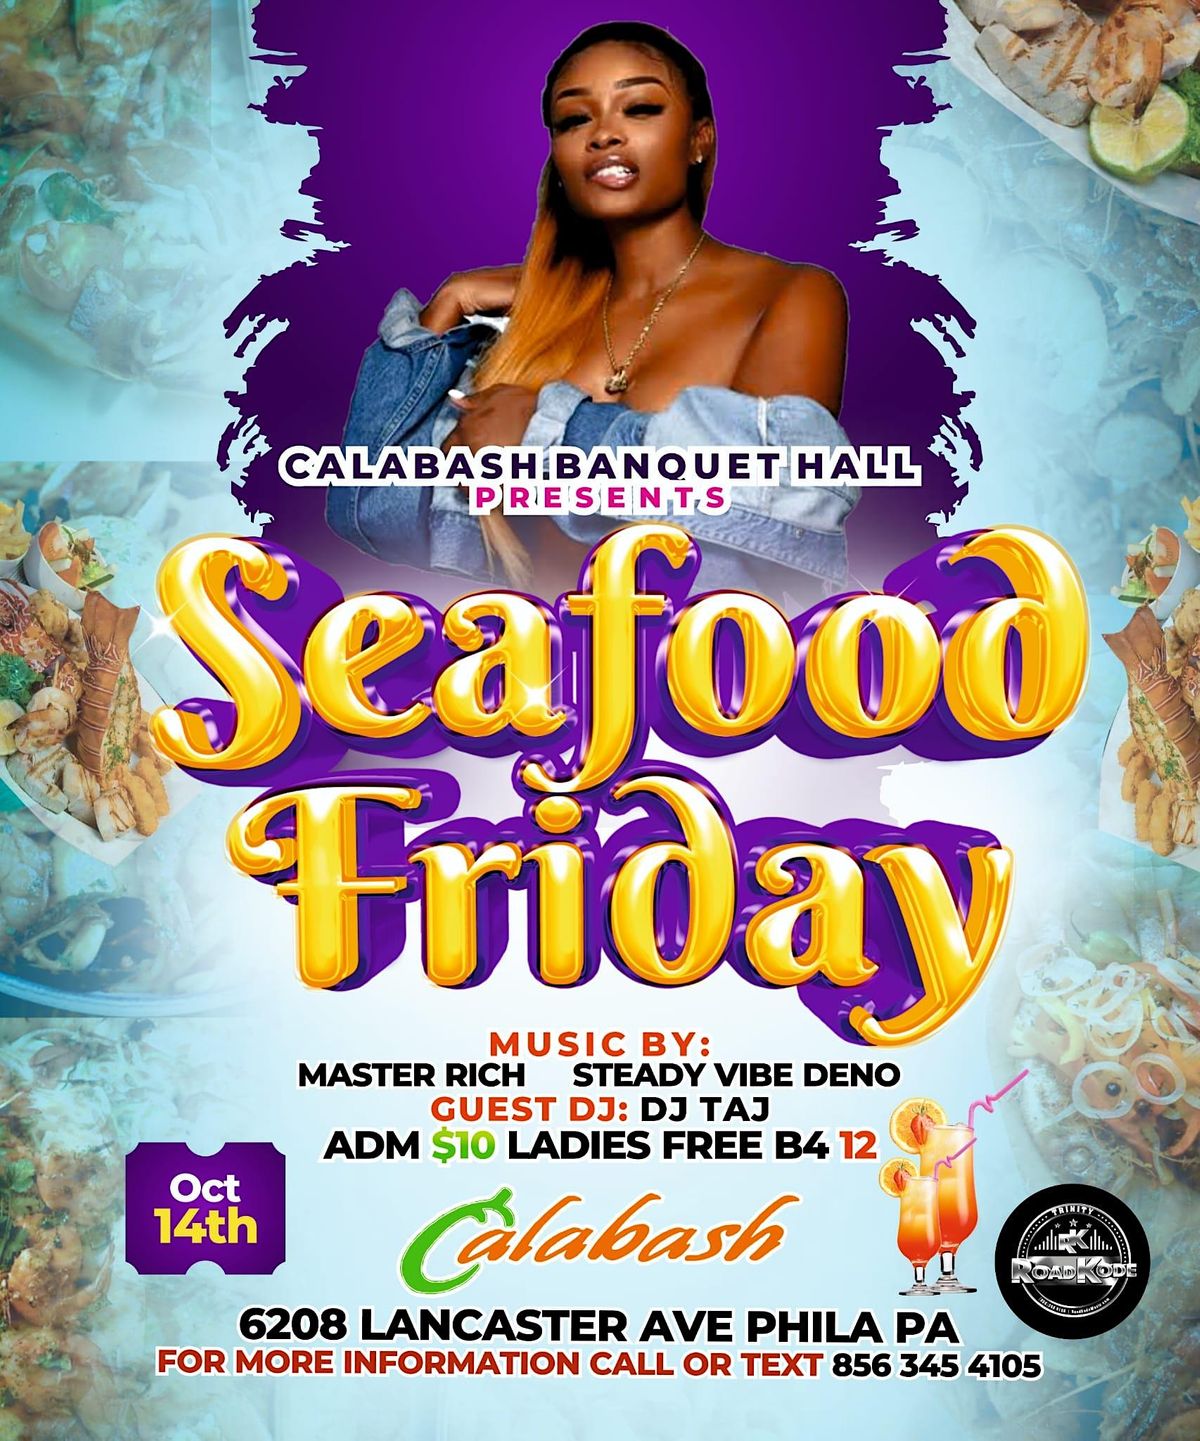 SEAFOOD FRIDAY'S WITH A TWIST